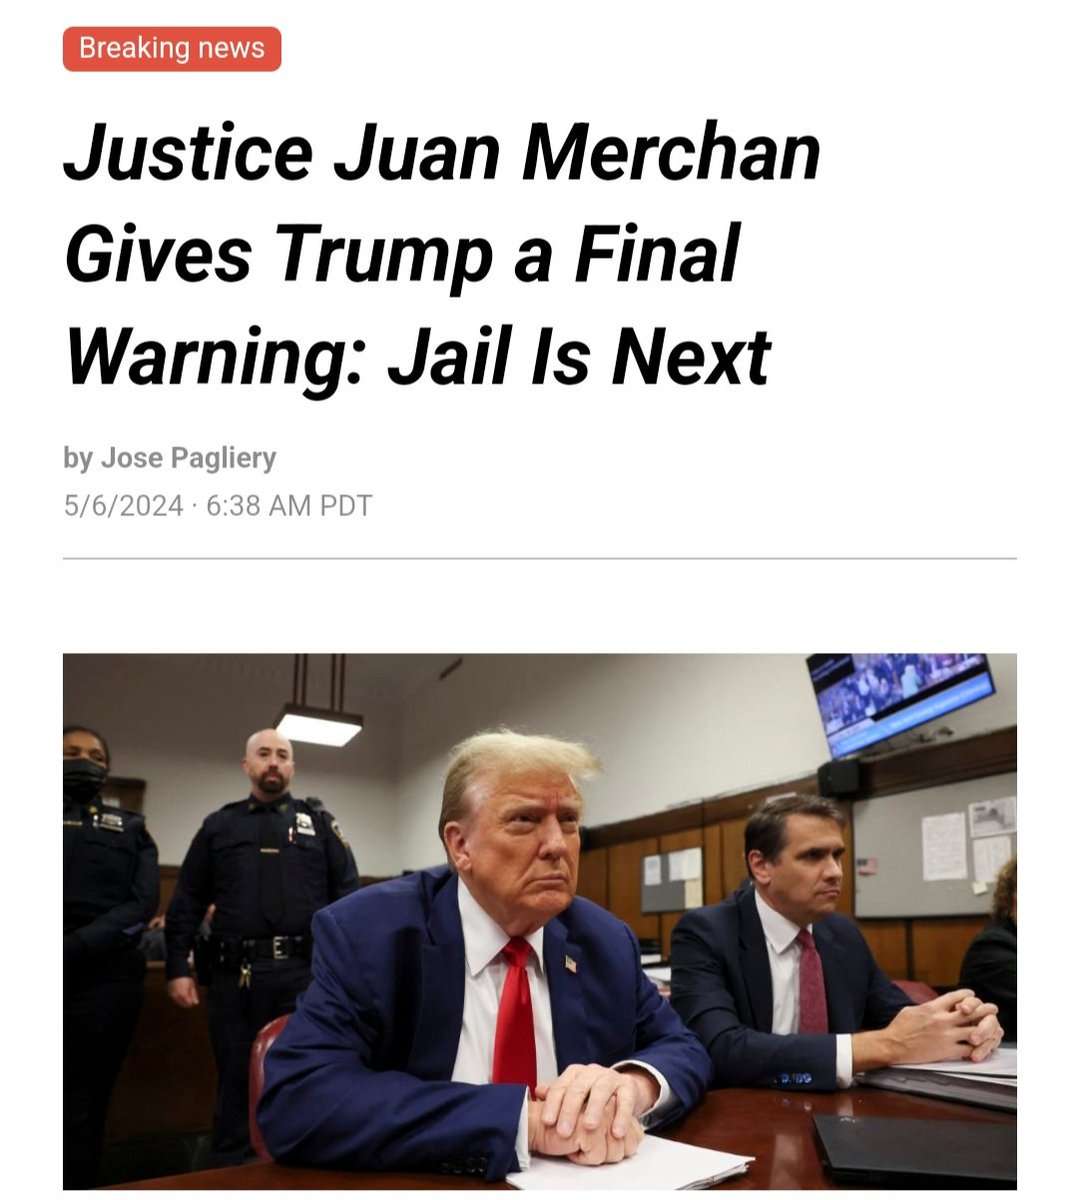 NO ⚖️ JUAN MERCHAN CAN GO 🖕 HIMSELF
@xDaily @XNews @TCNetwork @NEWSMAX @JudgeJeanine @dbongino @theblaze @JustTheNews @RSBNetwork @realDonaldTrump #Trump2024NowMorethanEver to #KAS
#TrumpPOTUS47 For ✌️ ON Planet 🌎
#AbrahamAccords & 2 #MAGA 👍🇺🇸👍